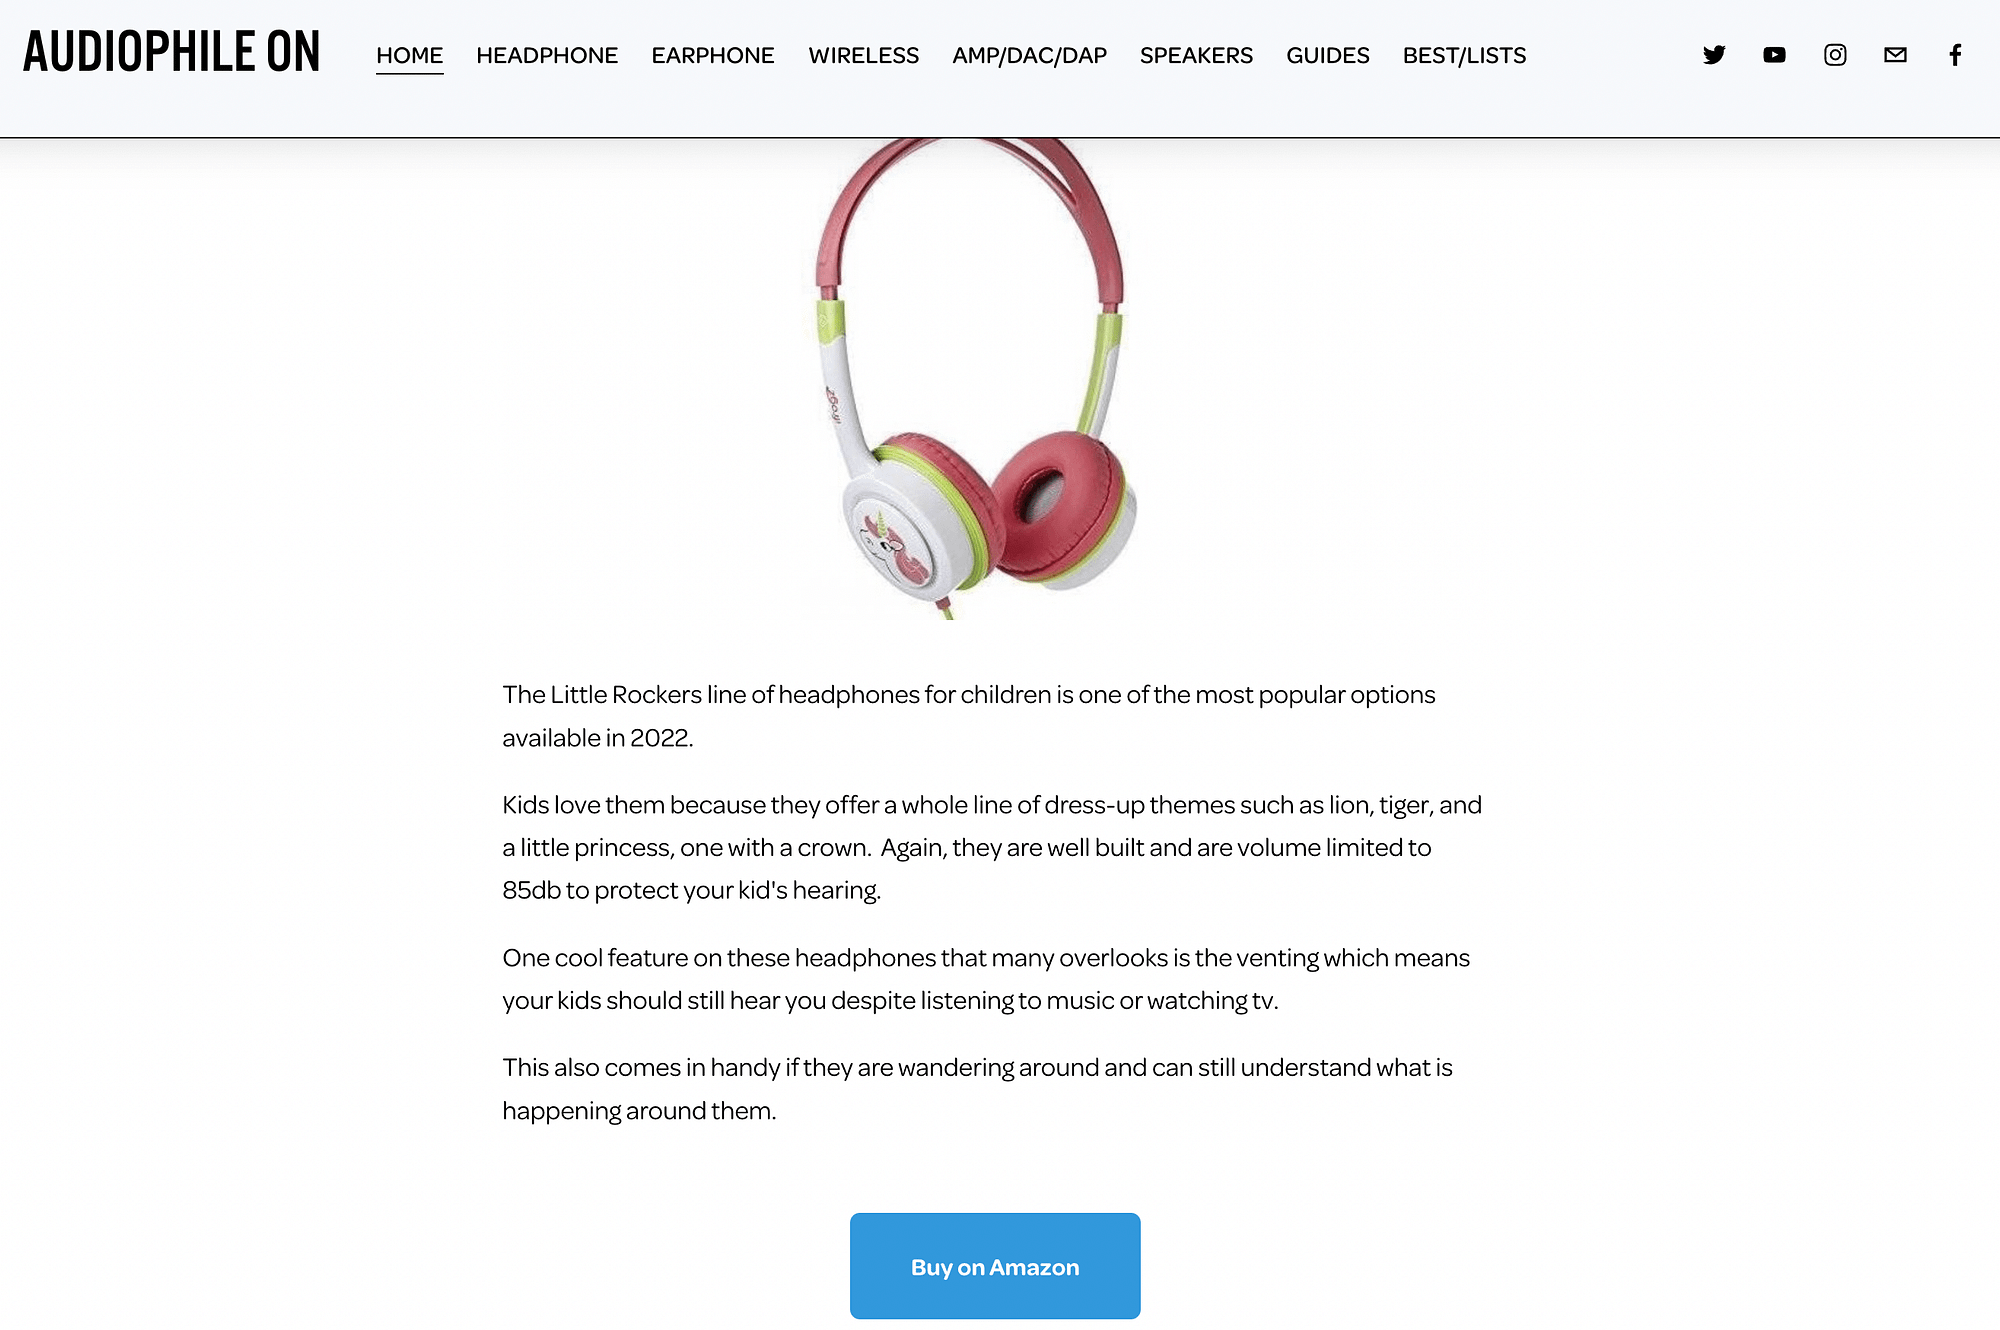 Amazon product review article